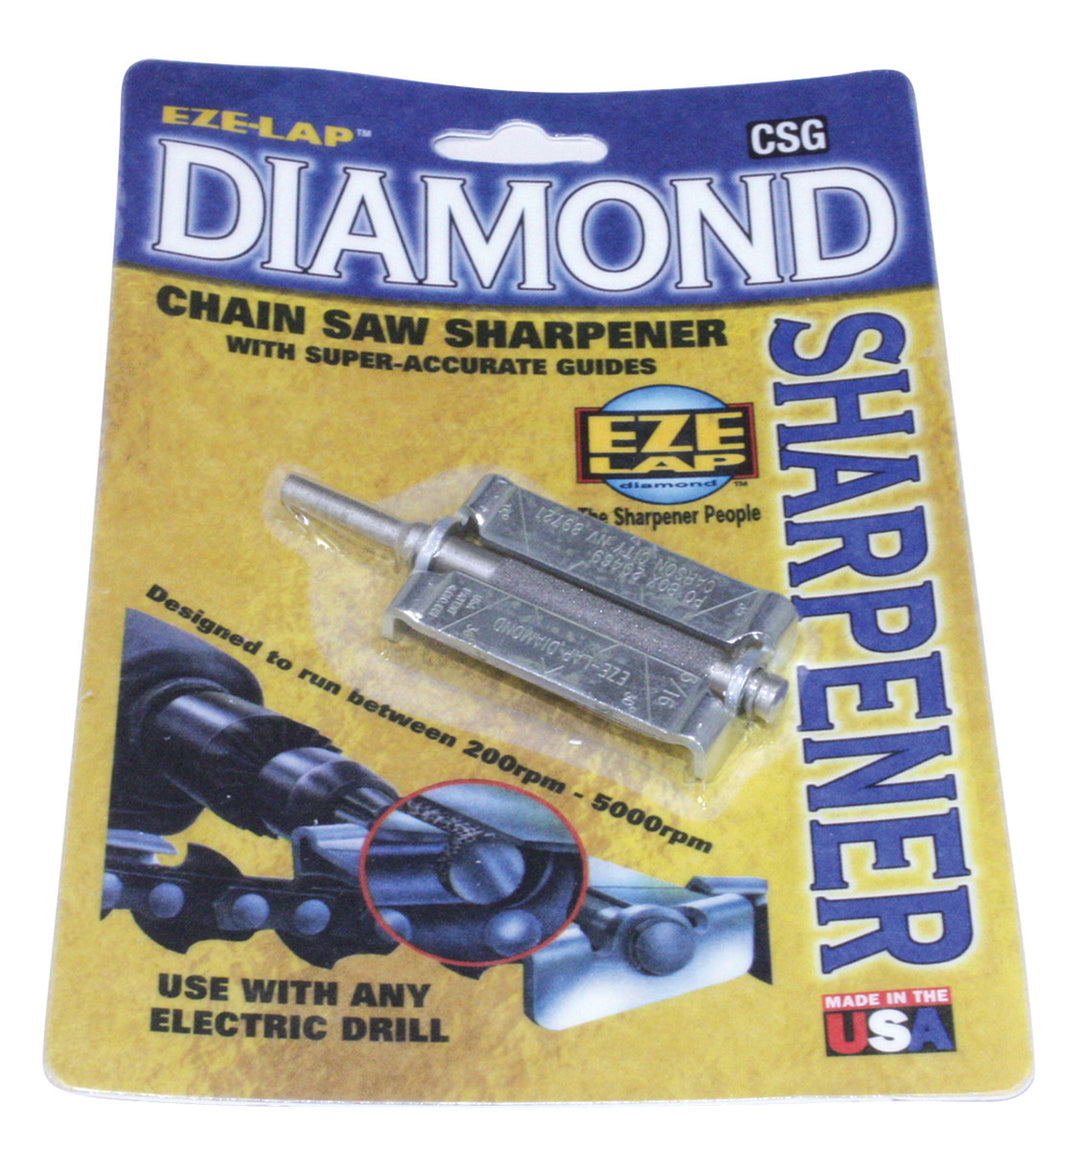 Eze-Lap Diamond Chainsaw Chain Sharpener - 5/32" - With Guide